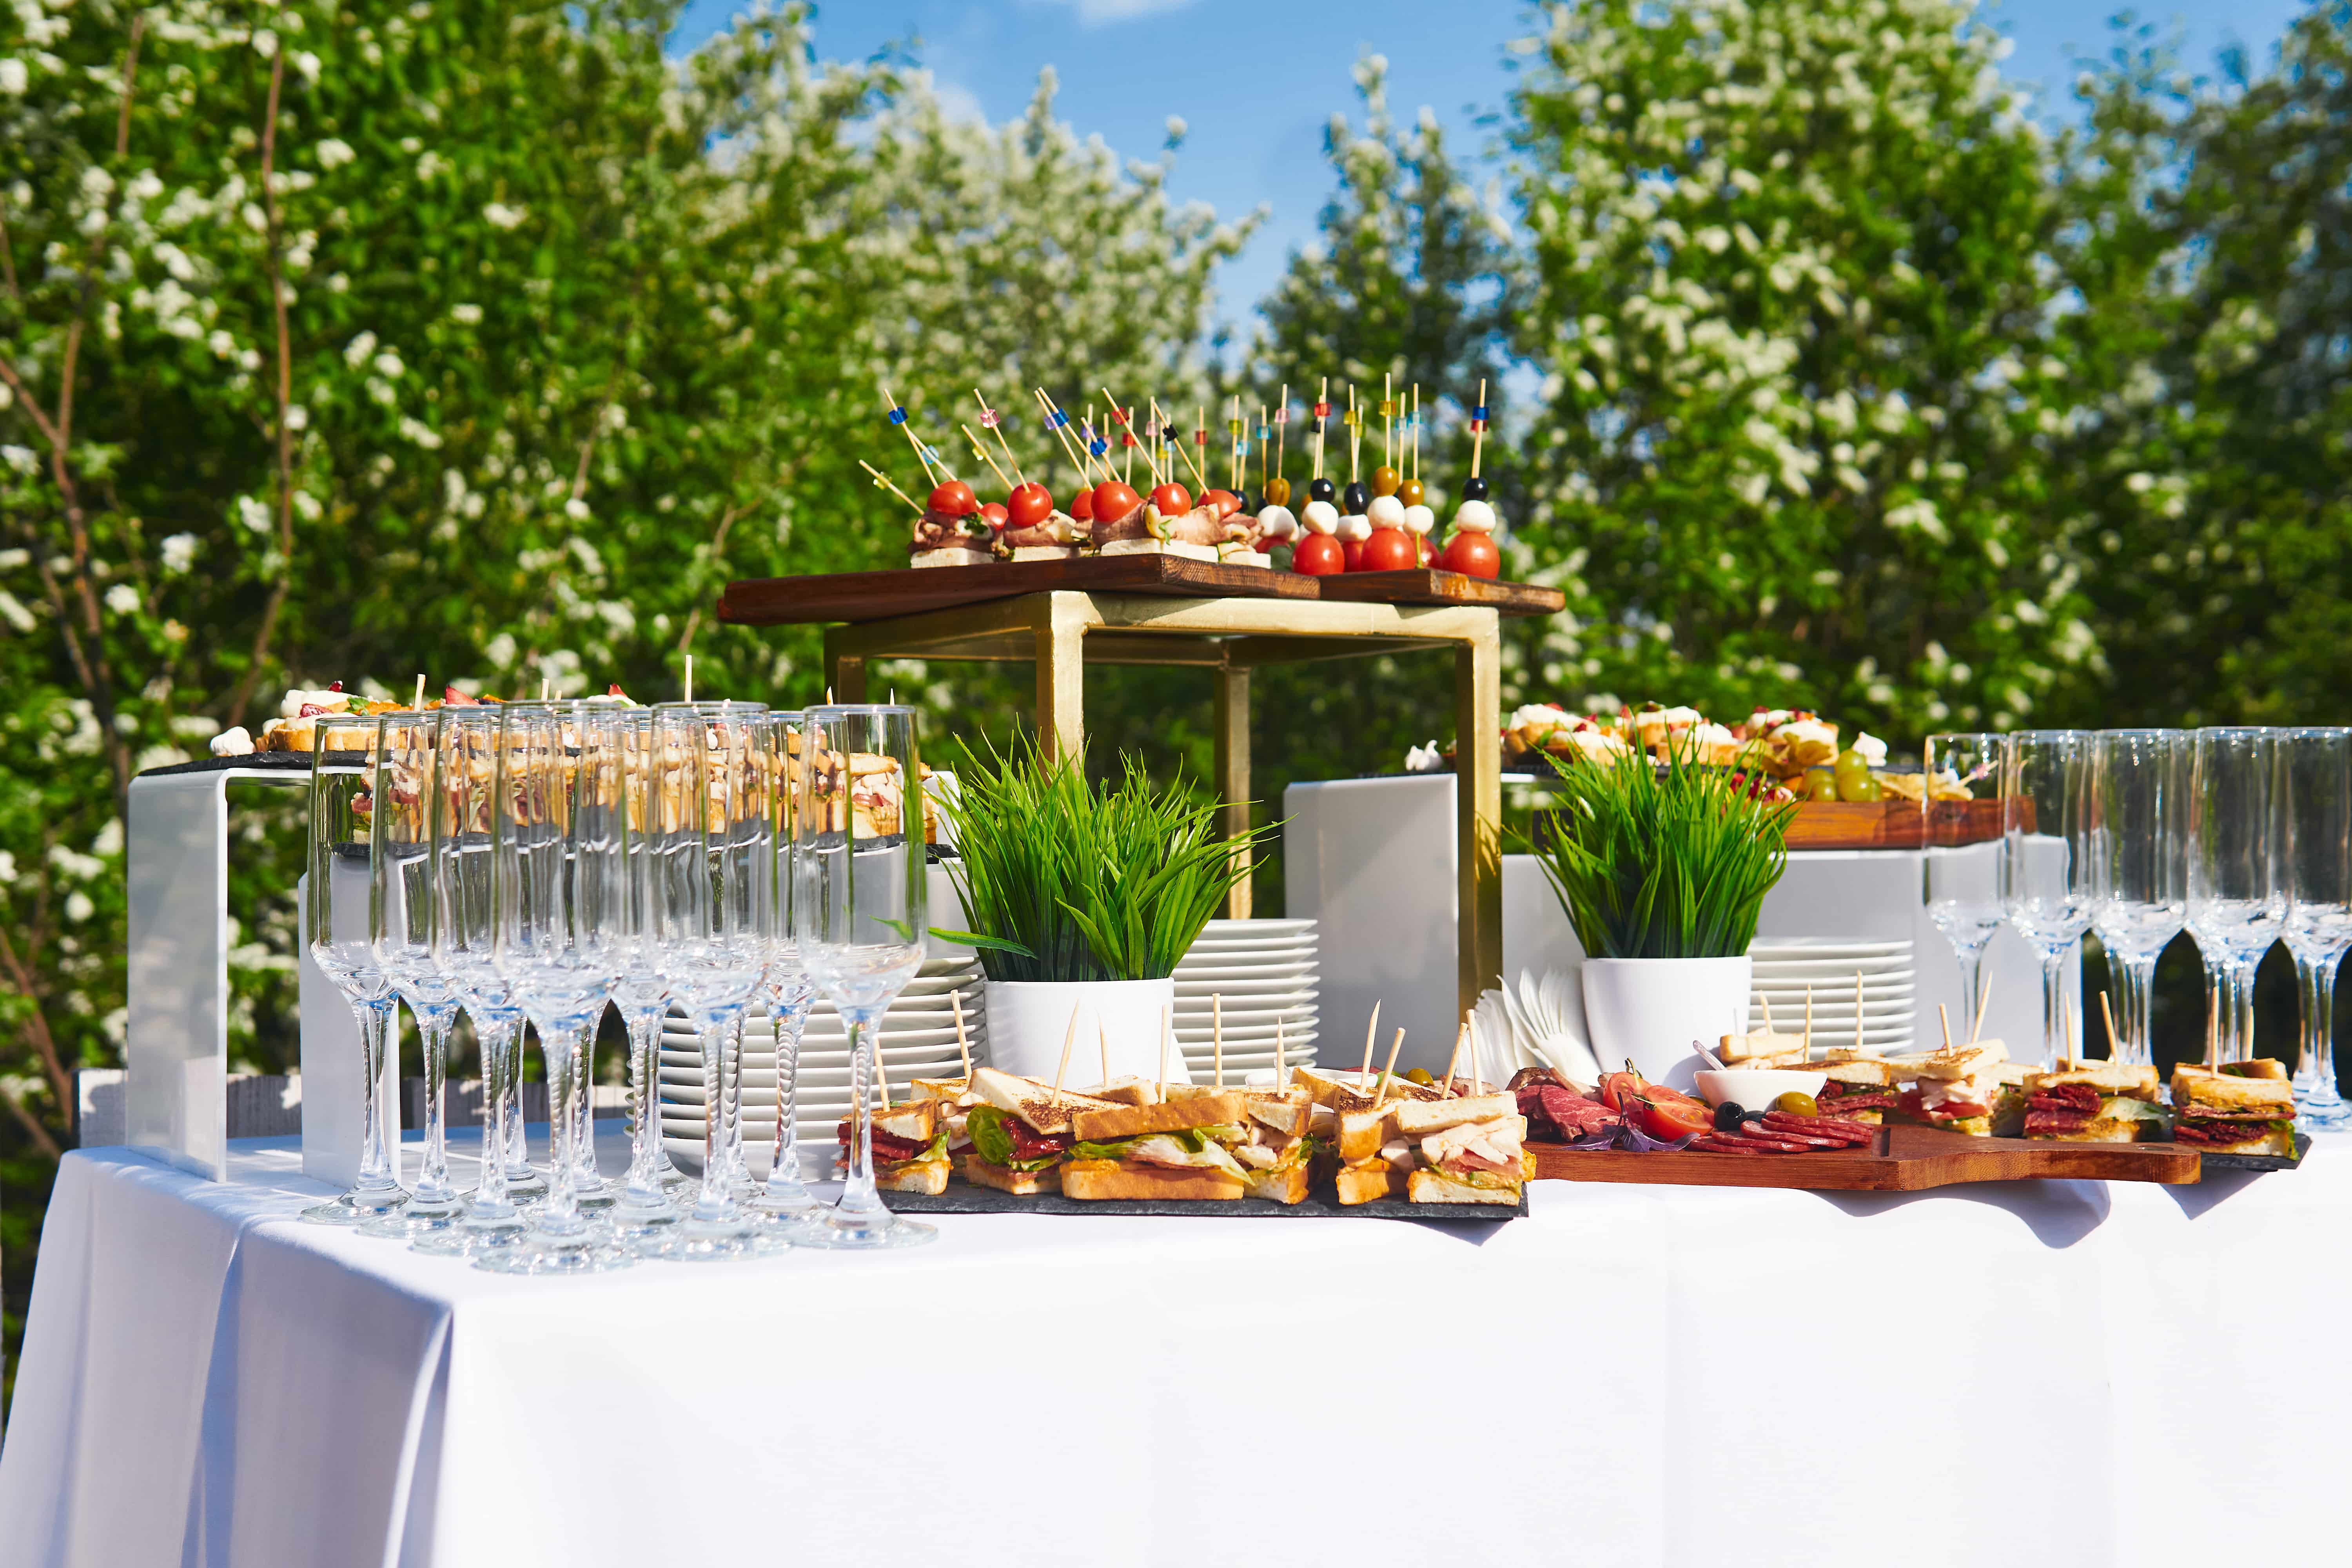 buffet in the open air - a table with canapes and glasses against the background of flowering trees and the sky